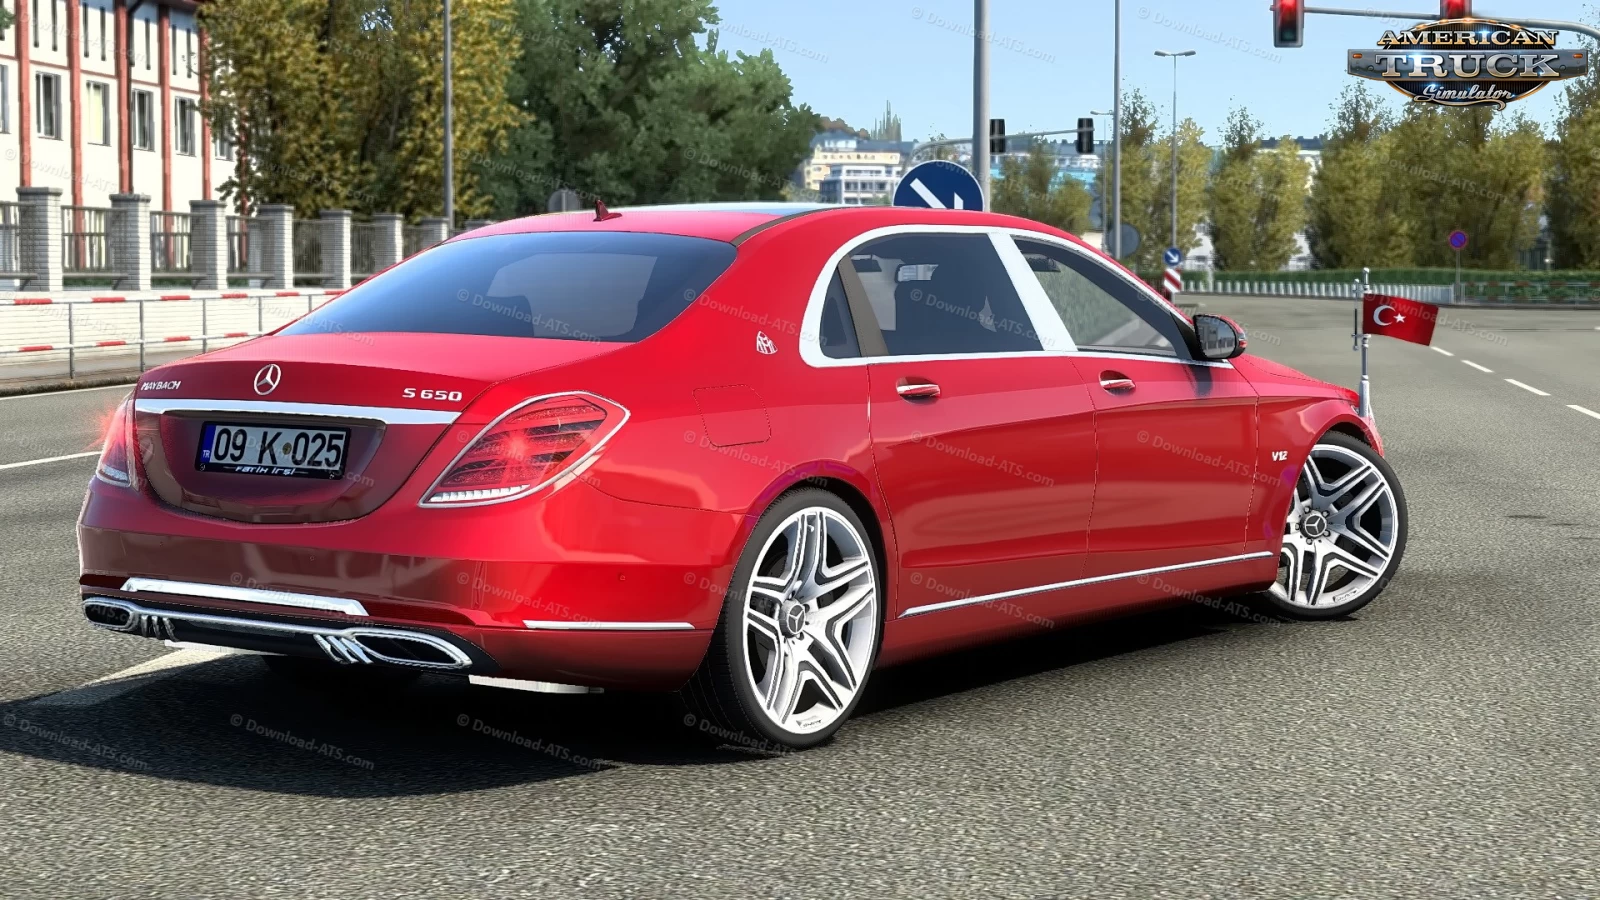 Mercedes-Benz Maybach S650 v1.0 (1.43.x) for ATS